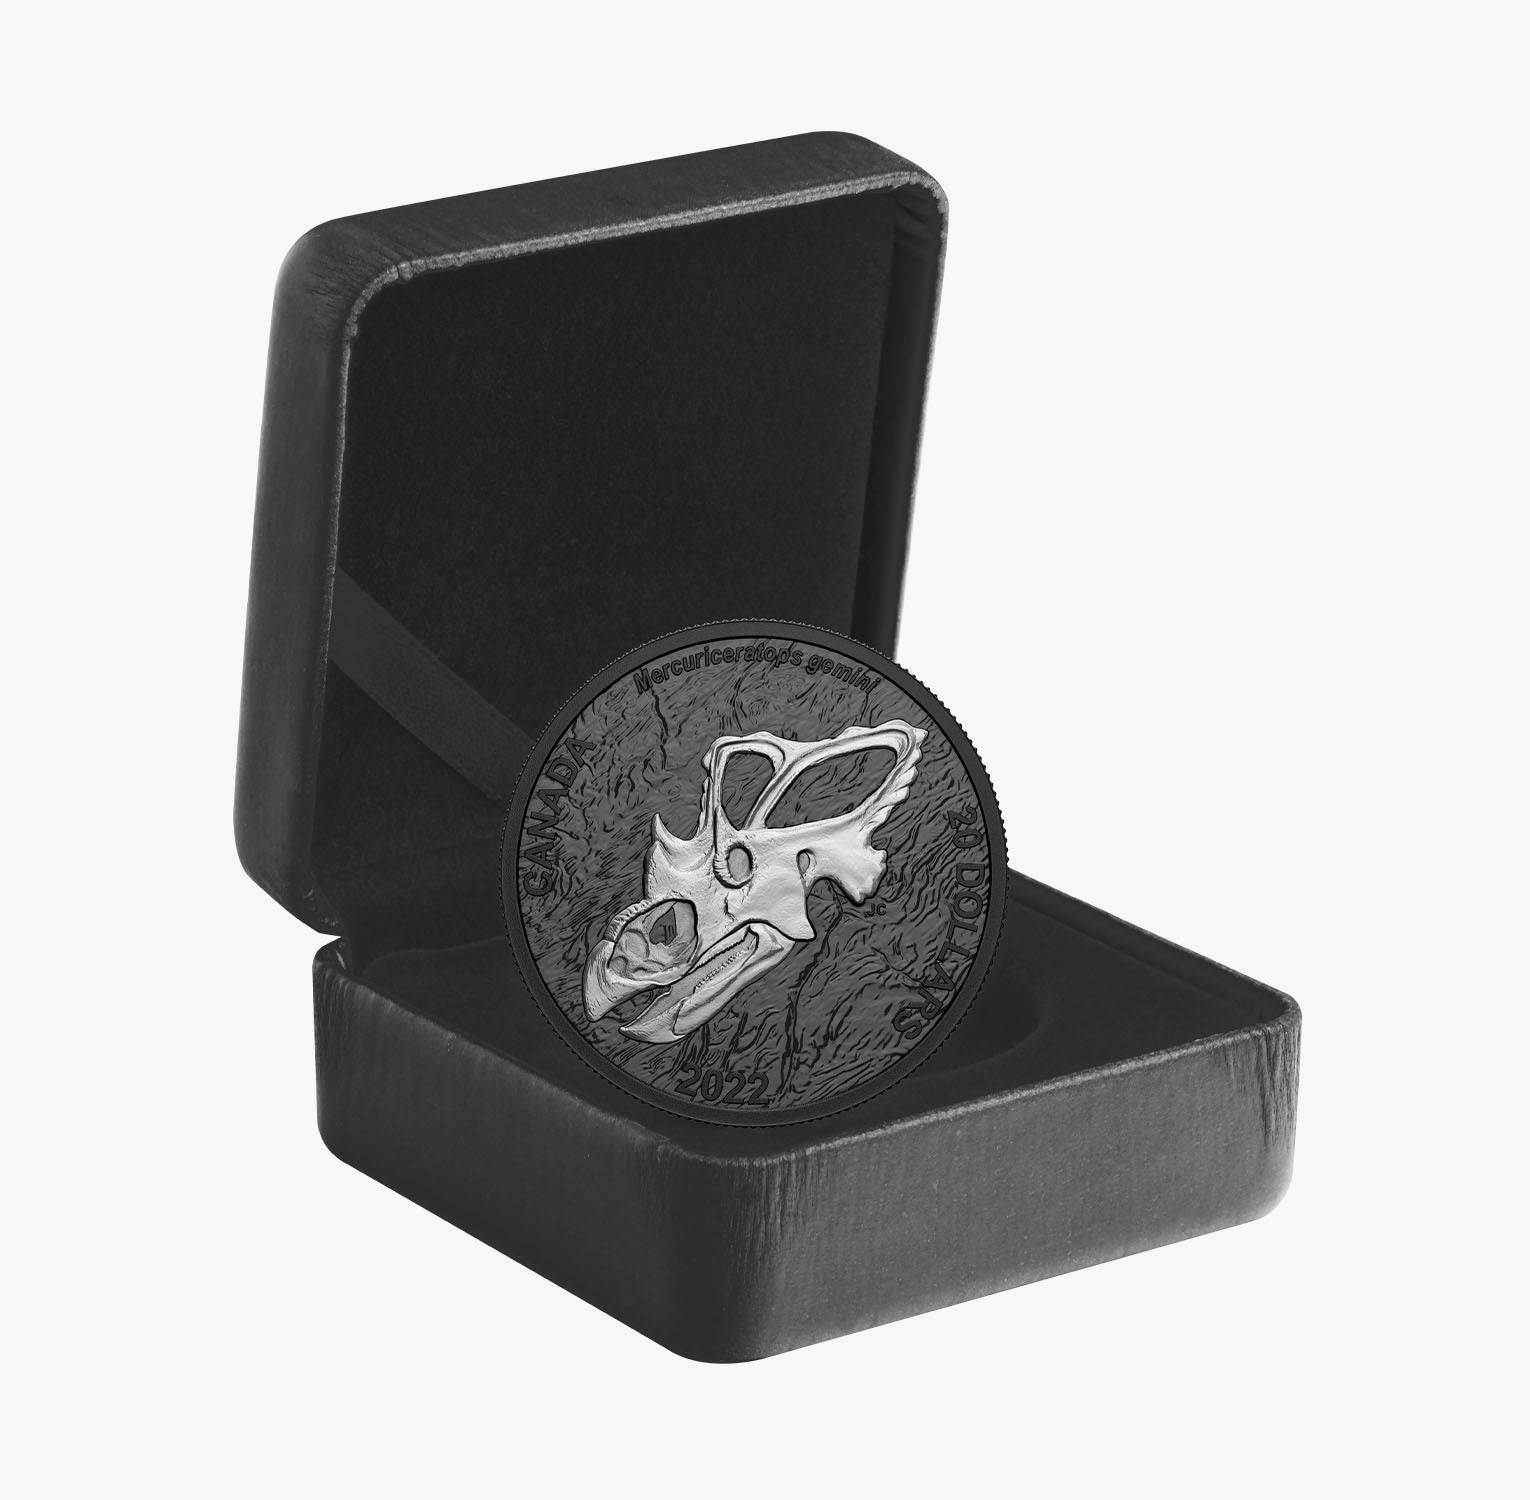 The 2022 Dinosaur Mercuriceratops 1oz Solid Silver Coin